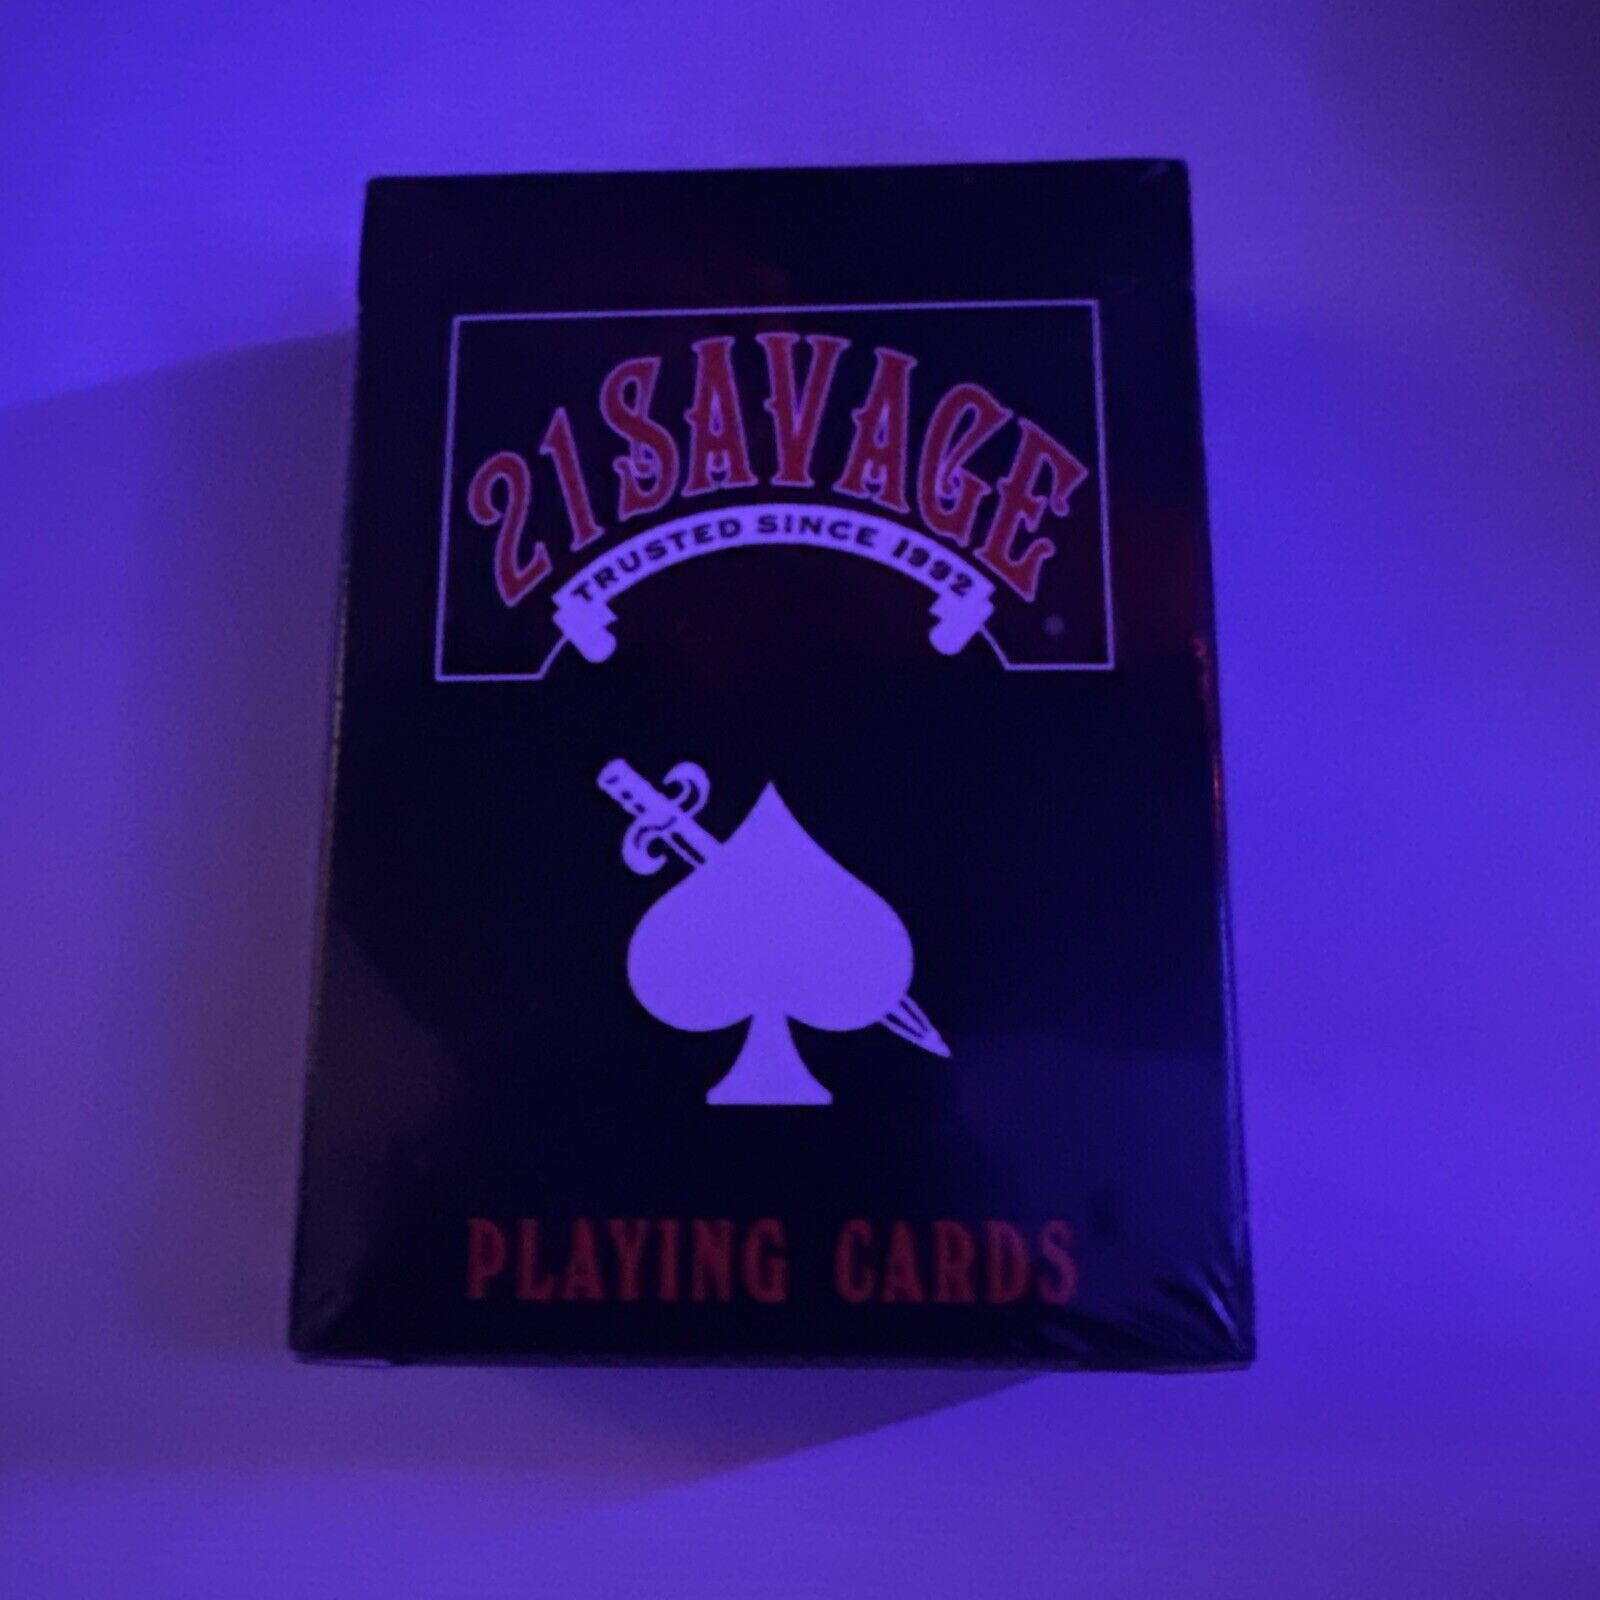 *RARE LIMITED EDITION* SEALED (21 Savage) Playing cards.